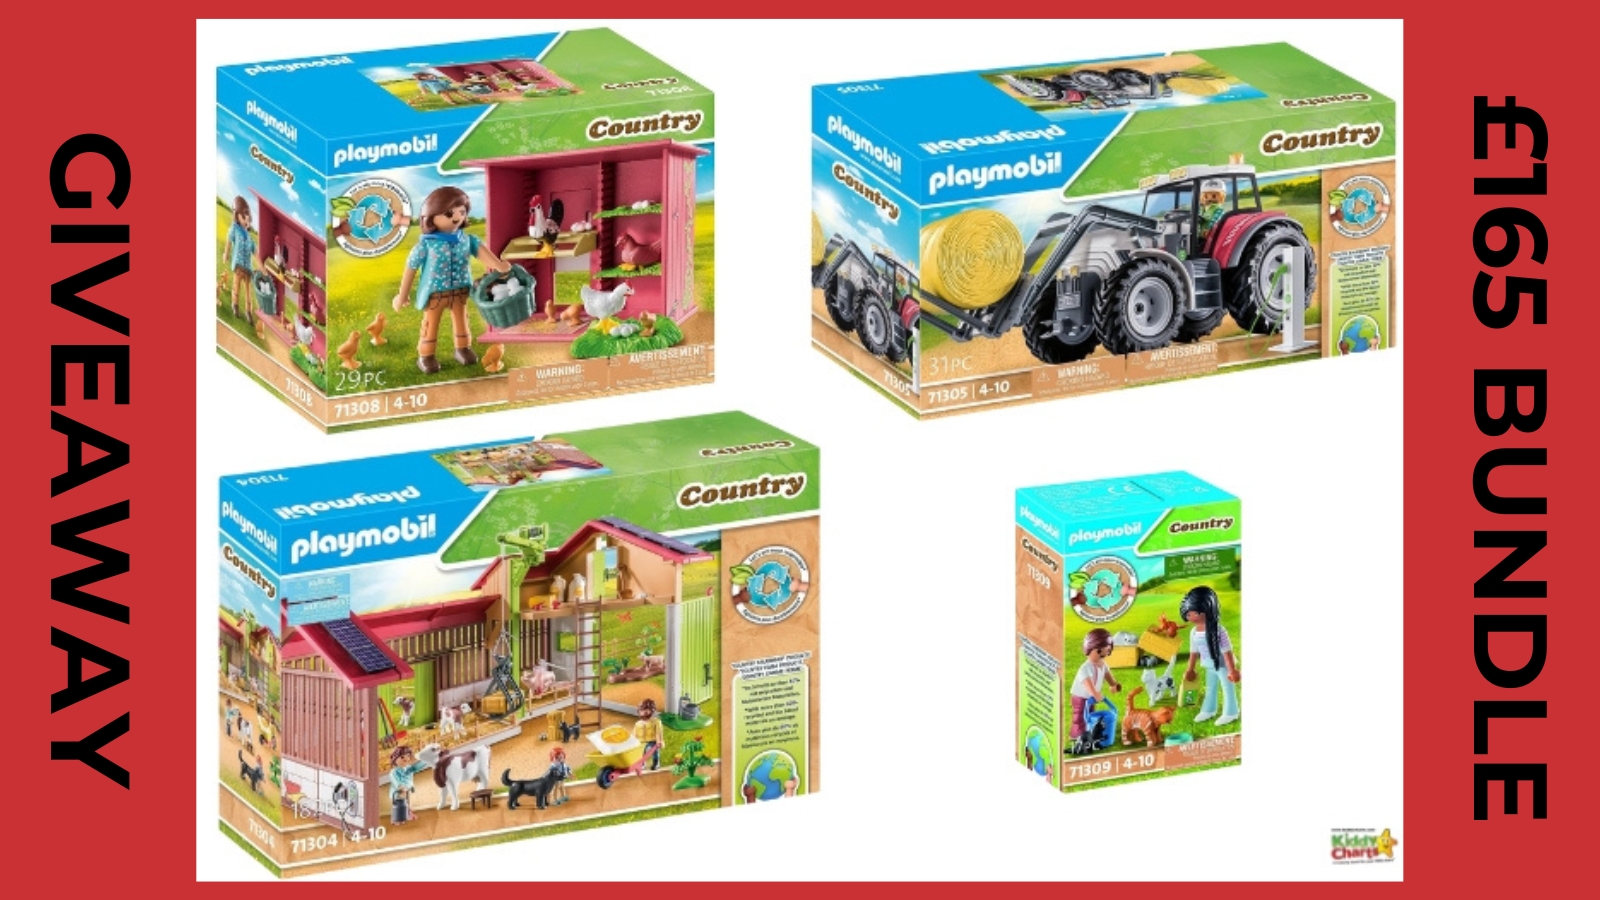 Playmobil Country giveaway: Win a £165 bundle of fun for your little ones!